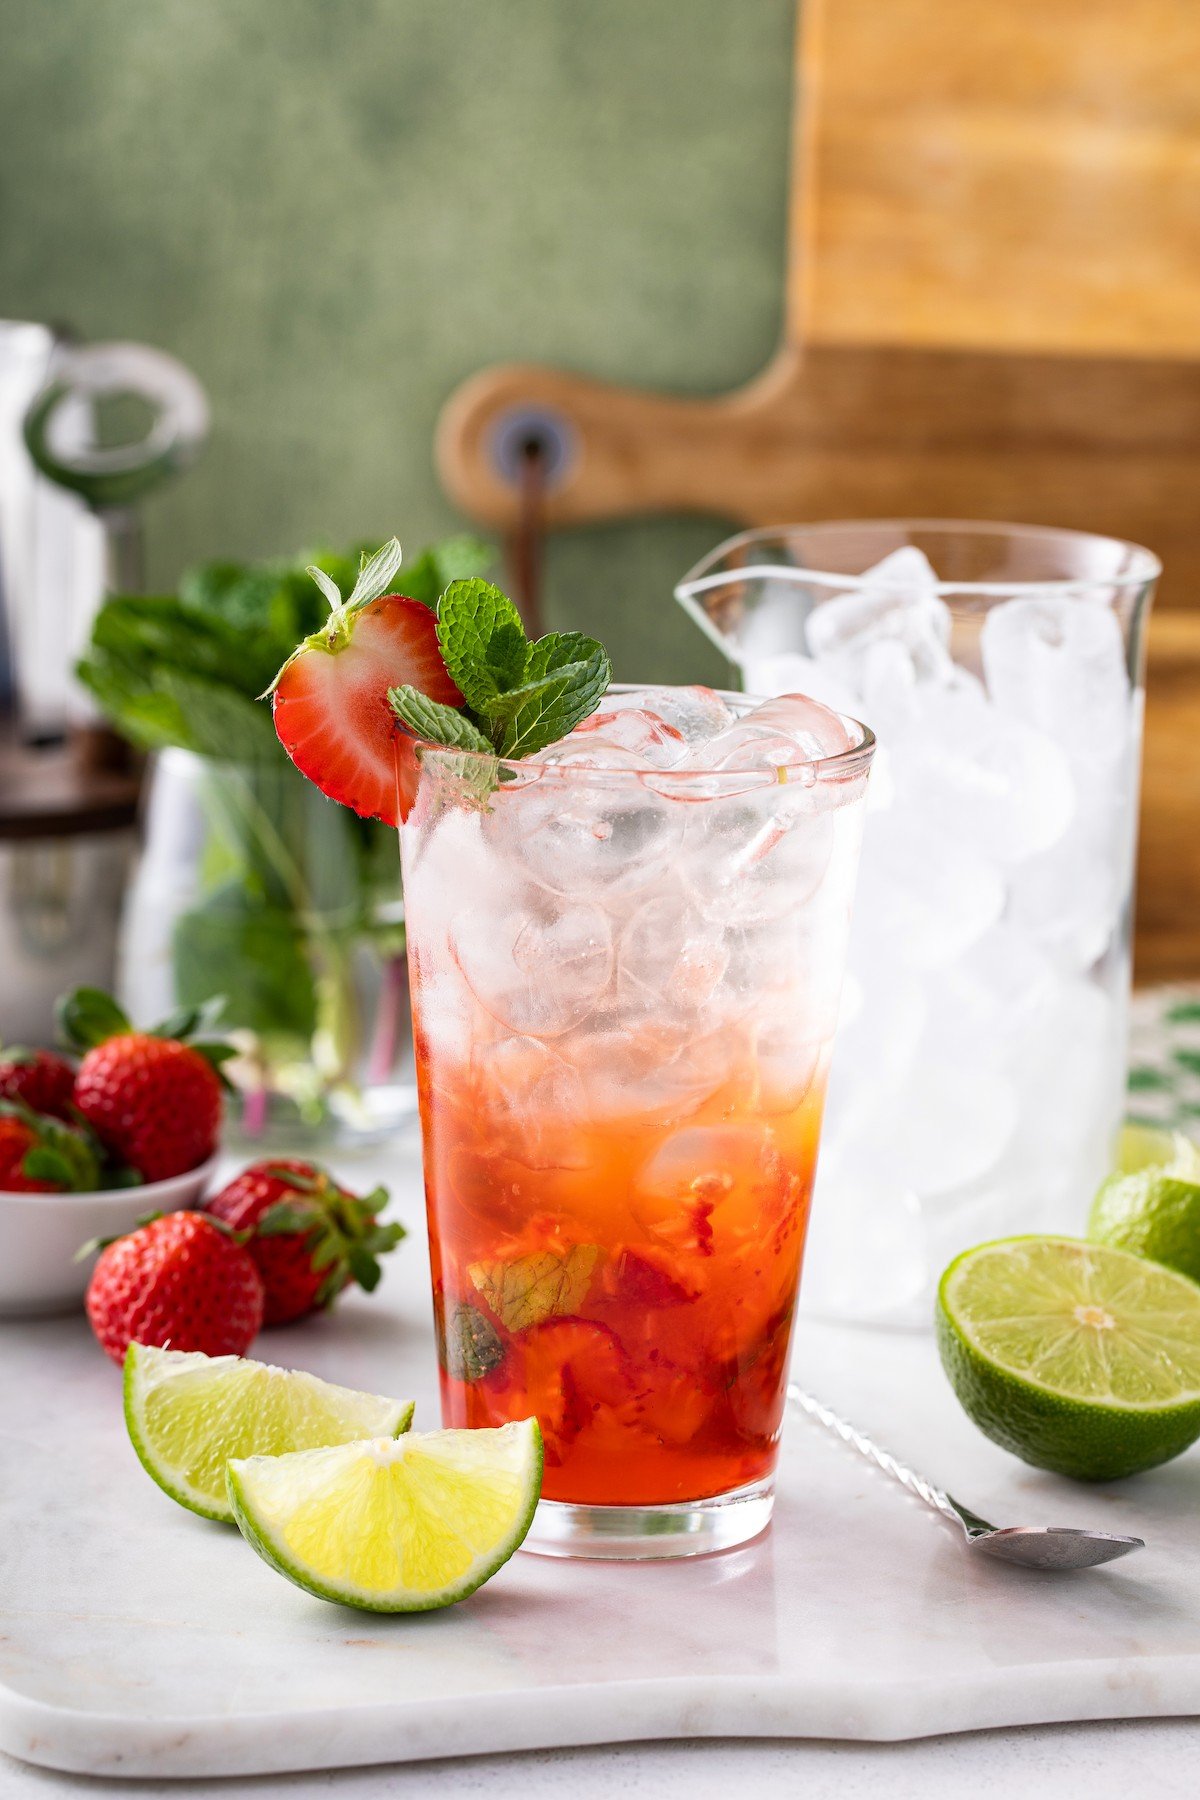 A strawberry mojito on a board next to a glass of ice, limes, and strawberries.